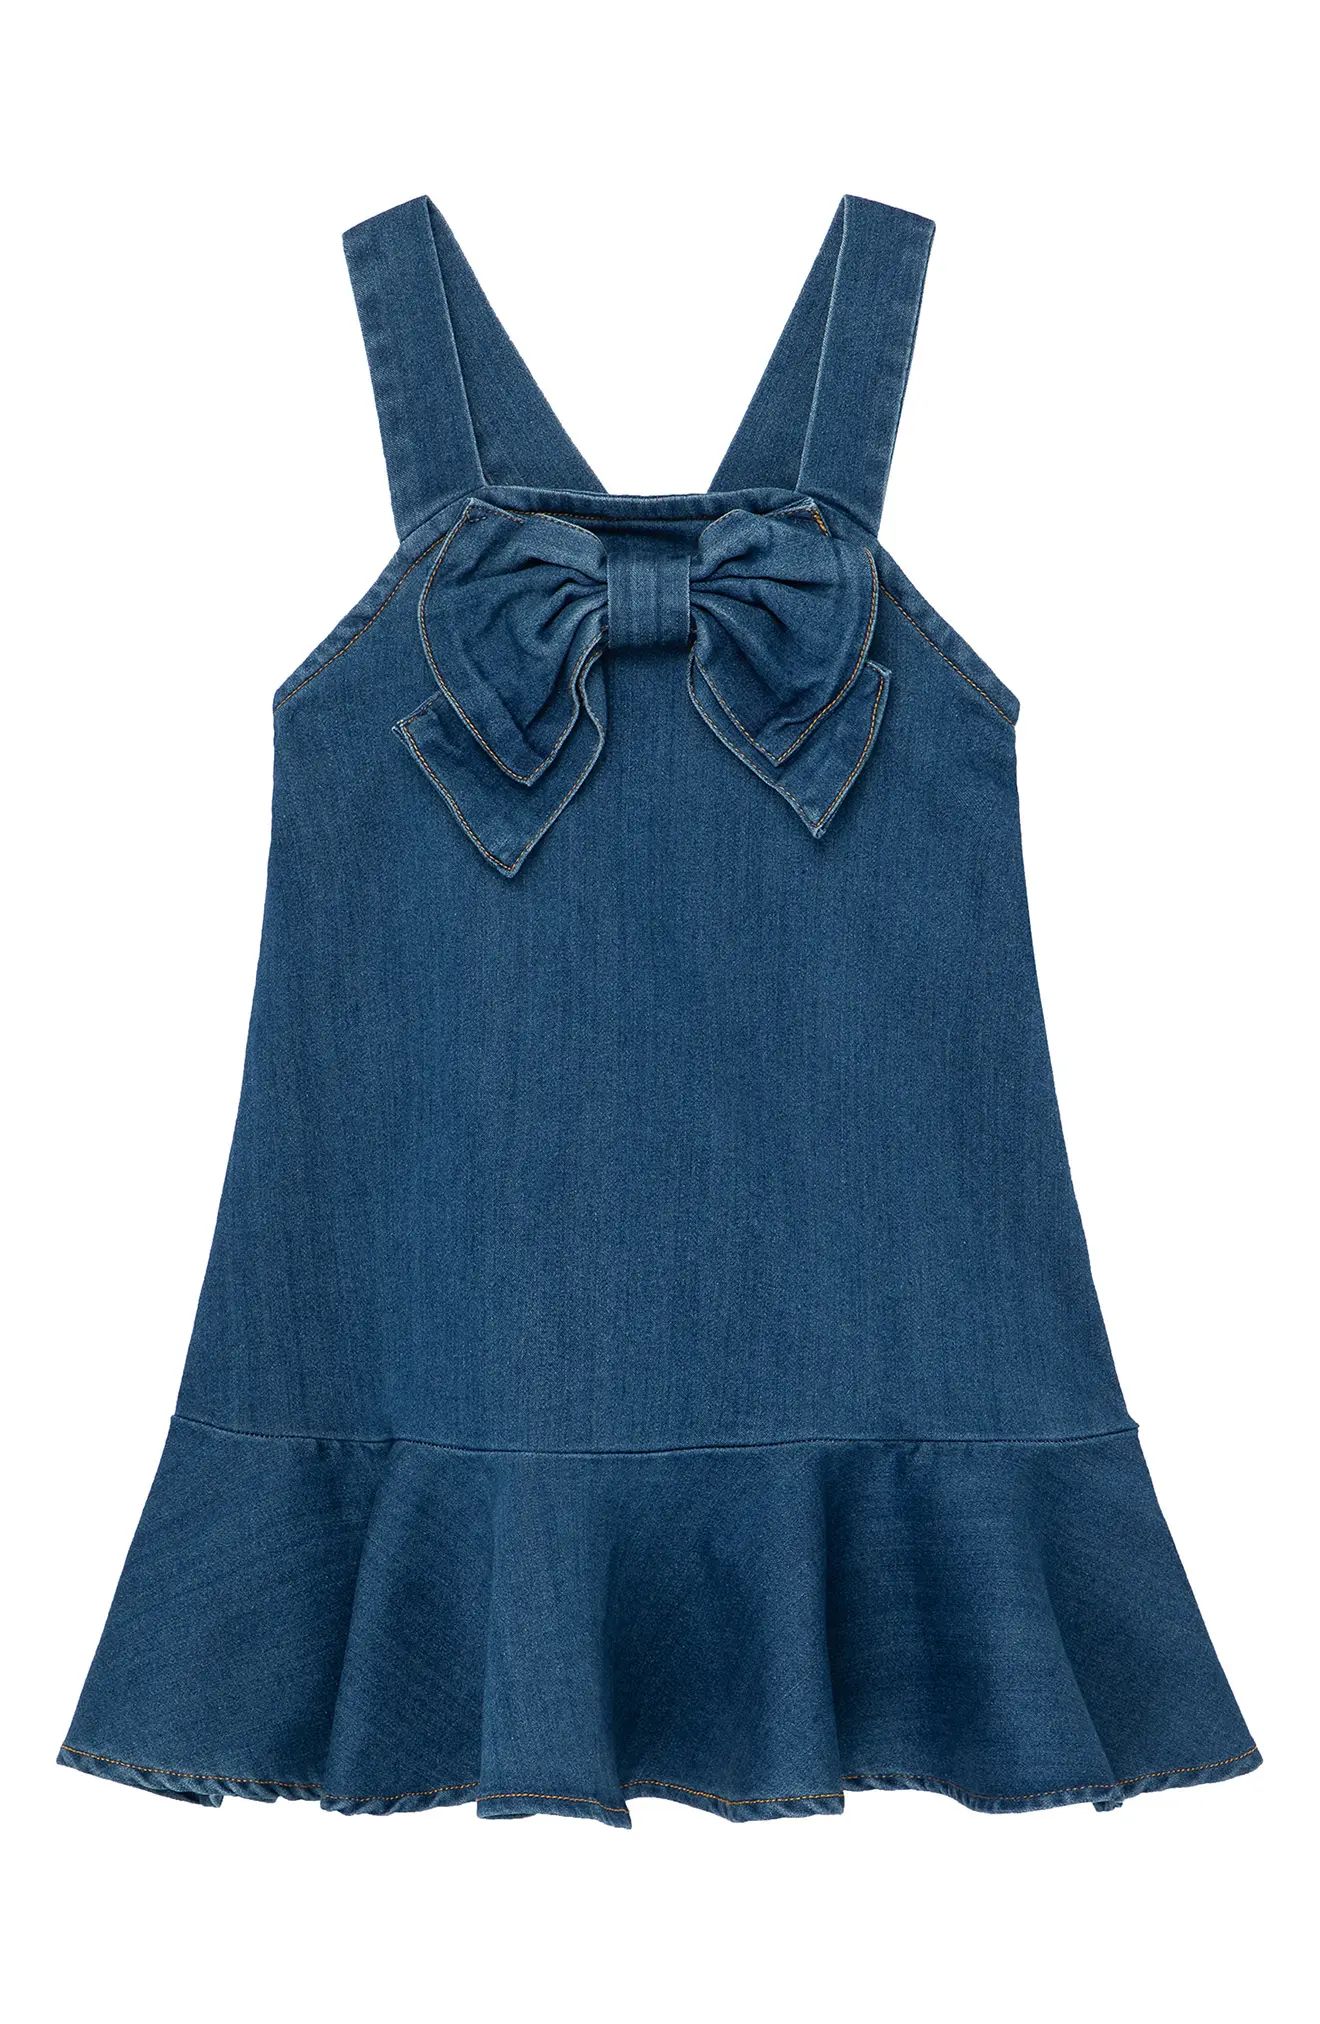 Habitual Girl Kids' Bow Flounce Dress in Med Stone at Nordstrom, Size 6X | Nordstrom